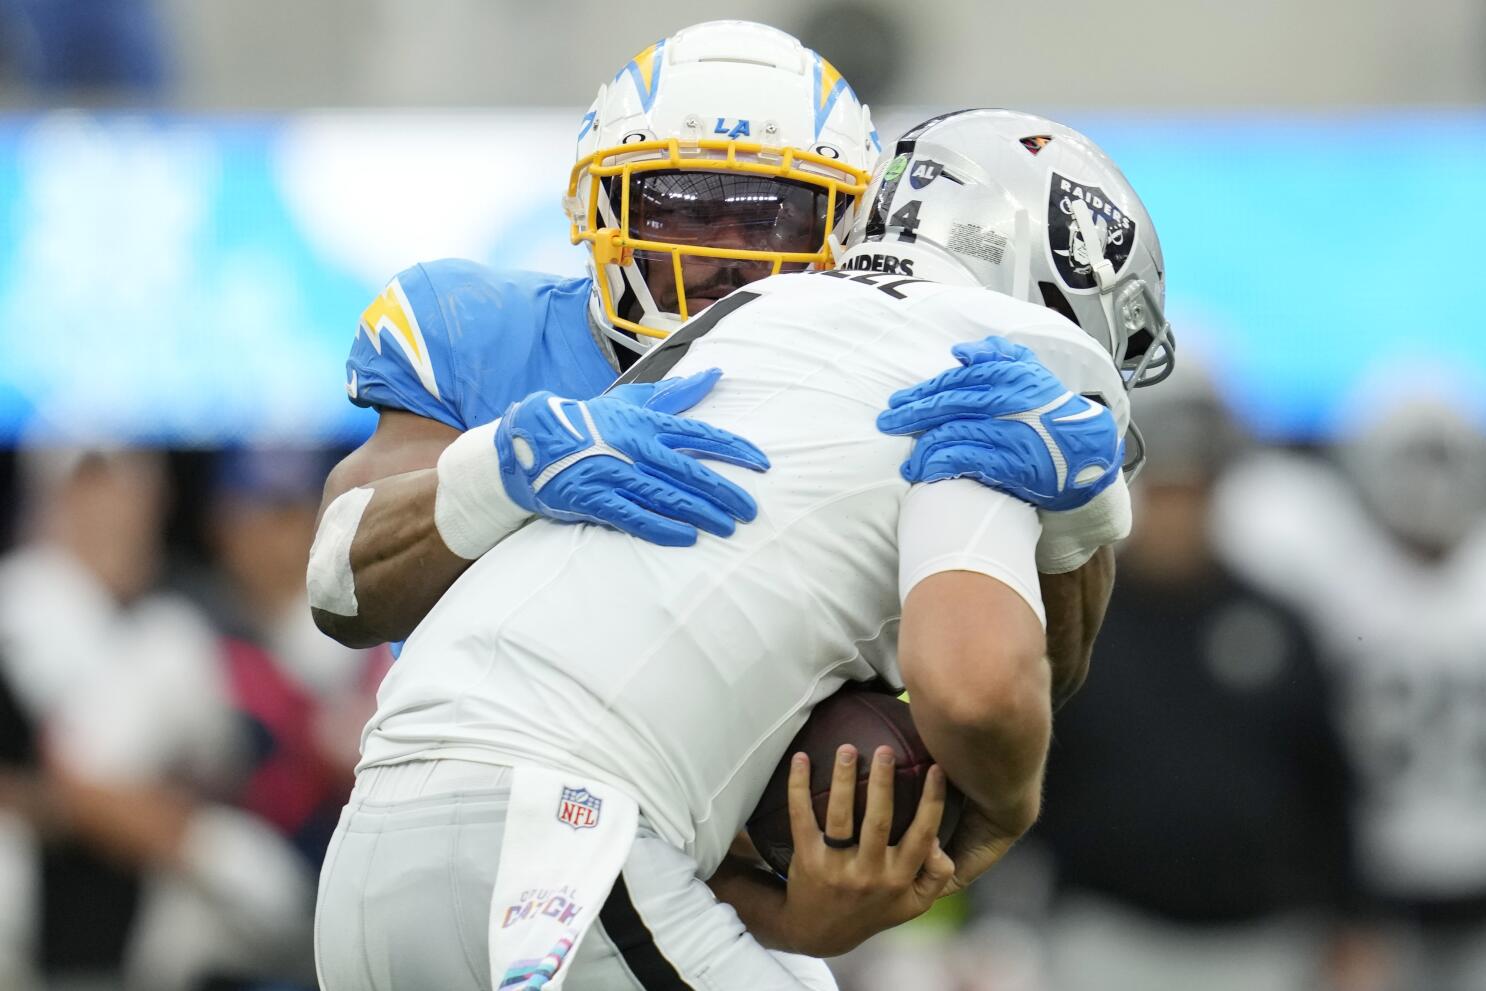 Chargers defeat Raiders 24-17